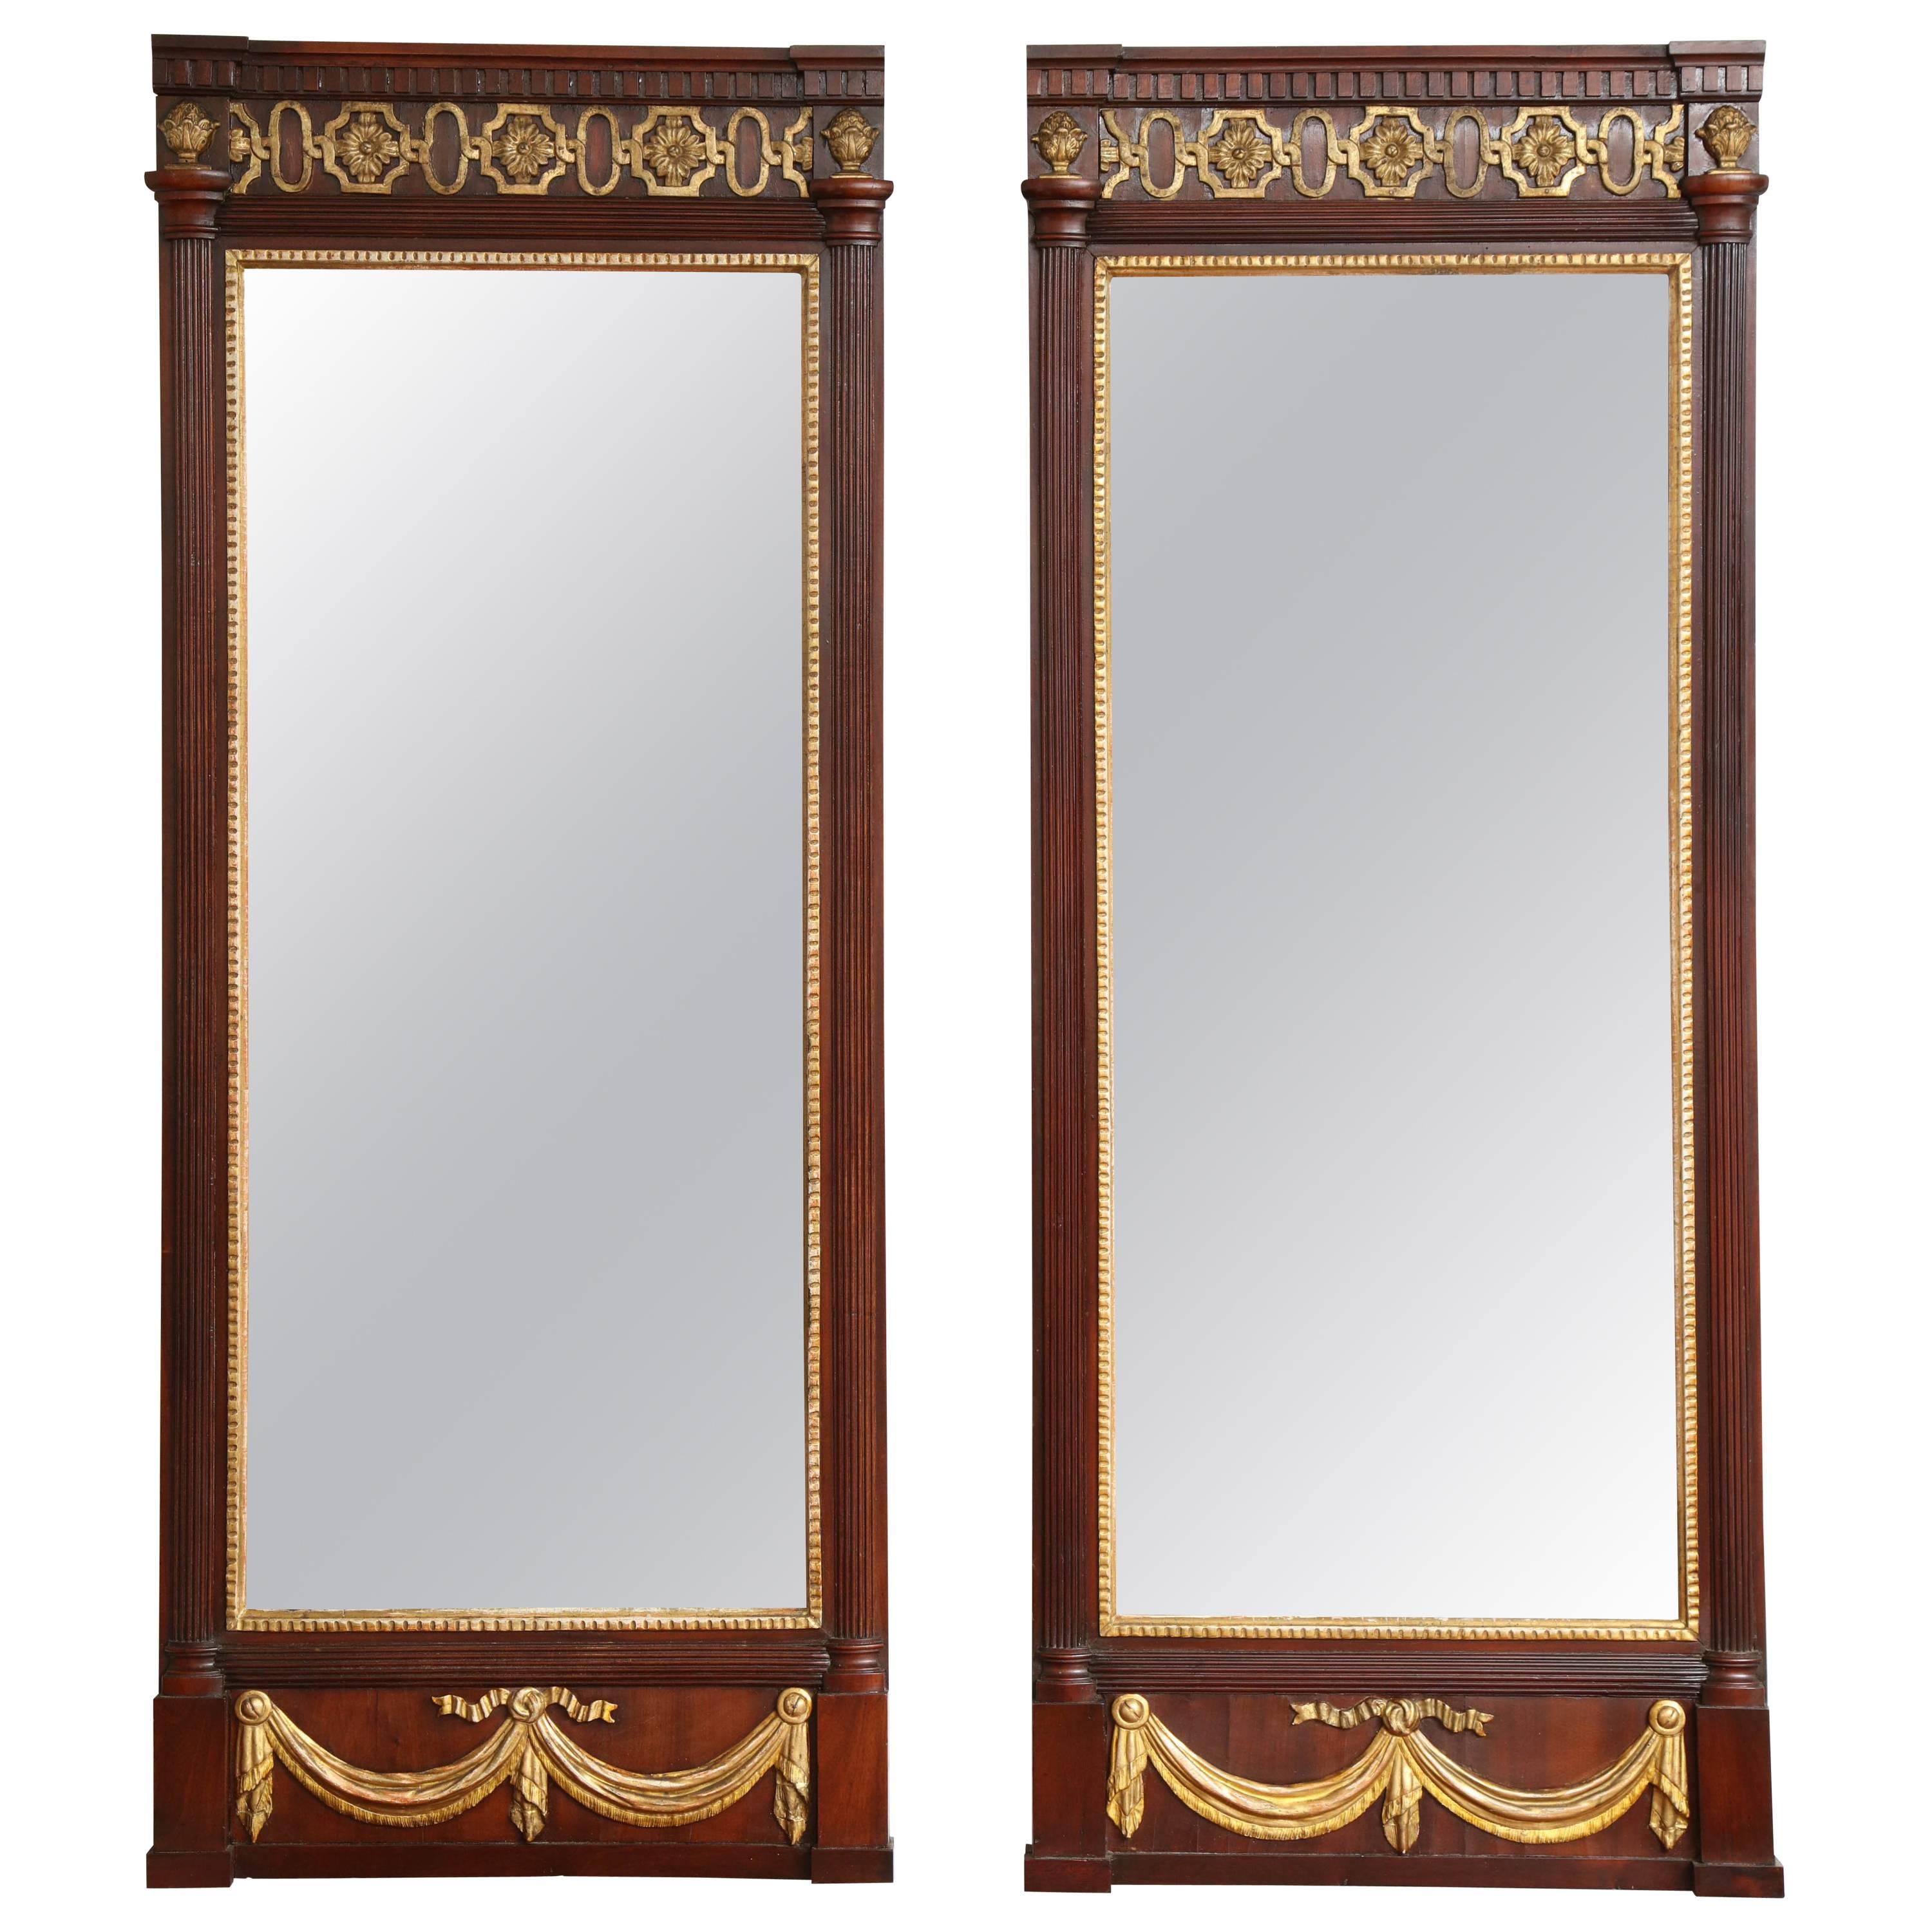 Pair of Danish Louis XVI Mahogany and Parcel-Gilt Mirrors, circa 1790s For Sale